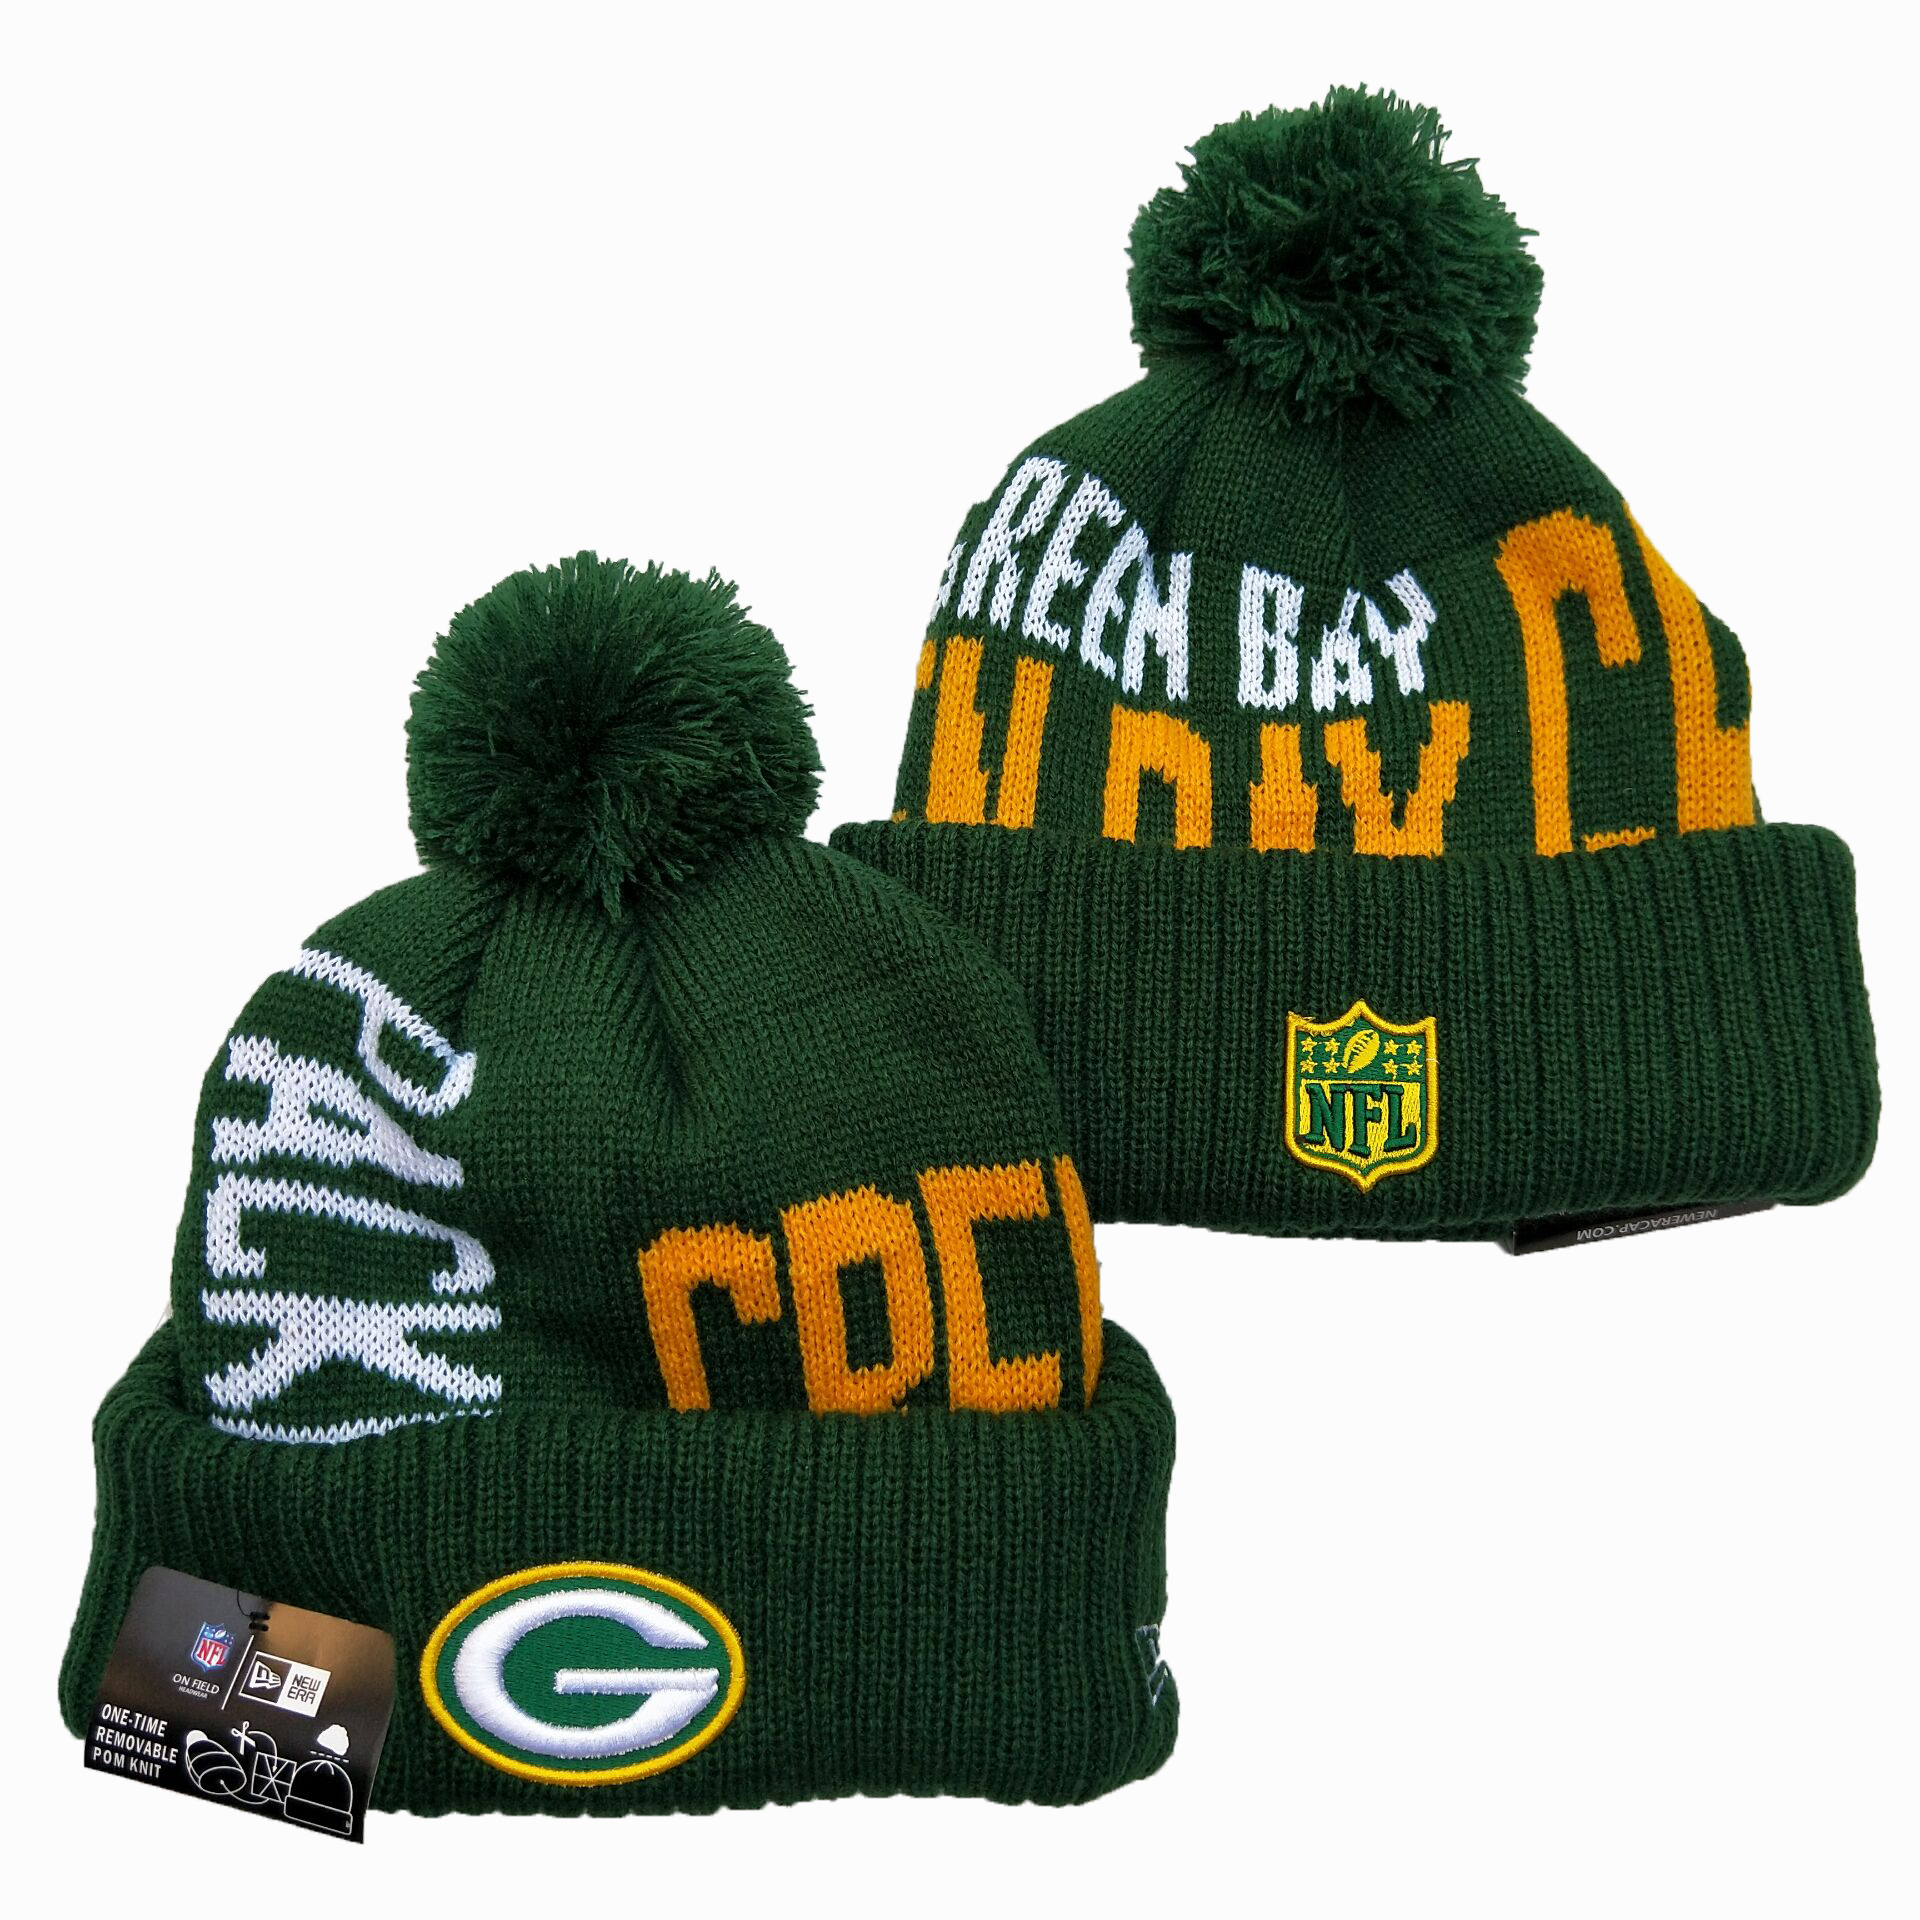 NFL Green Bay Packers Knit Hats 090